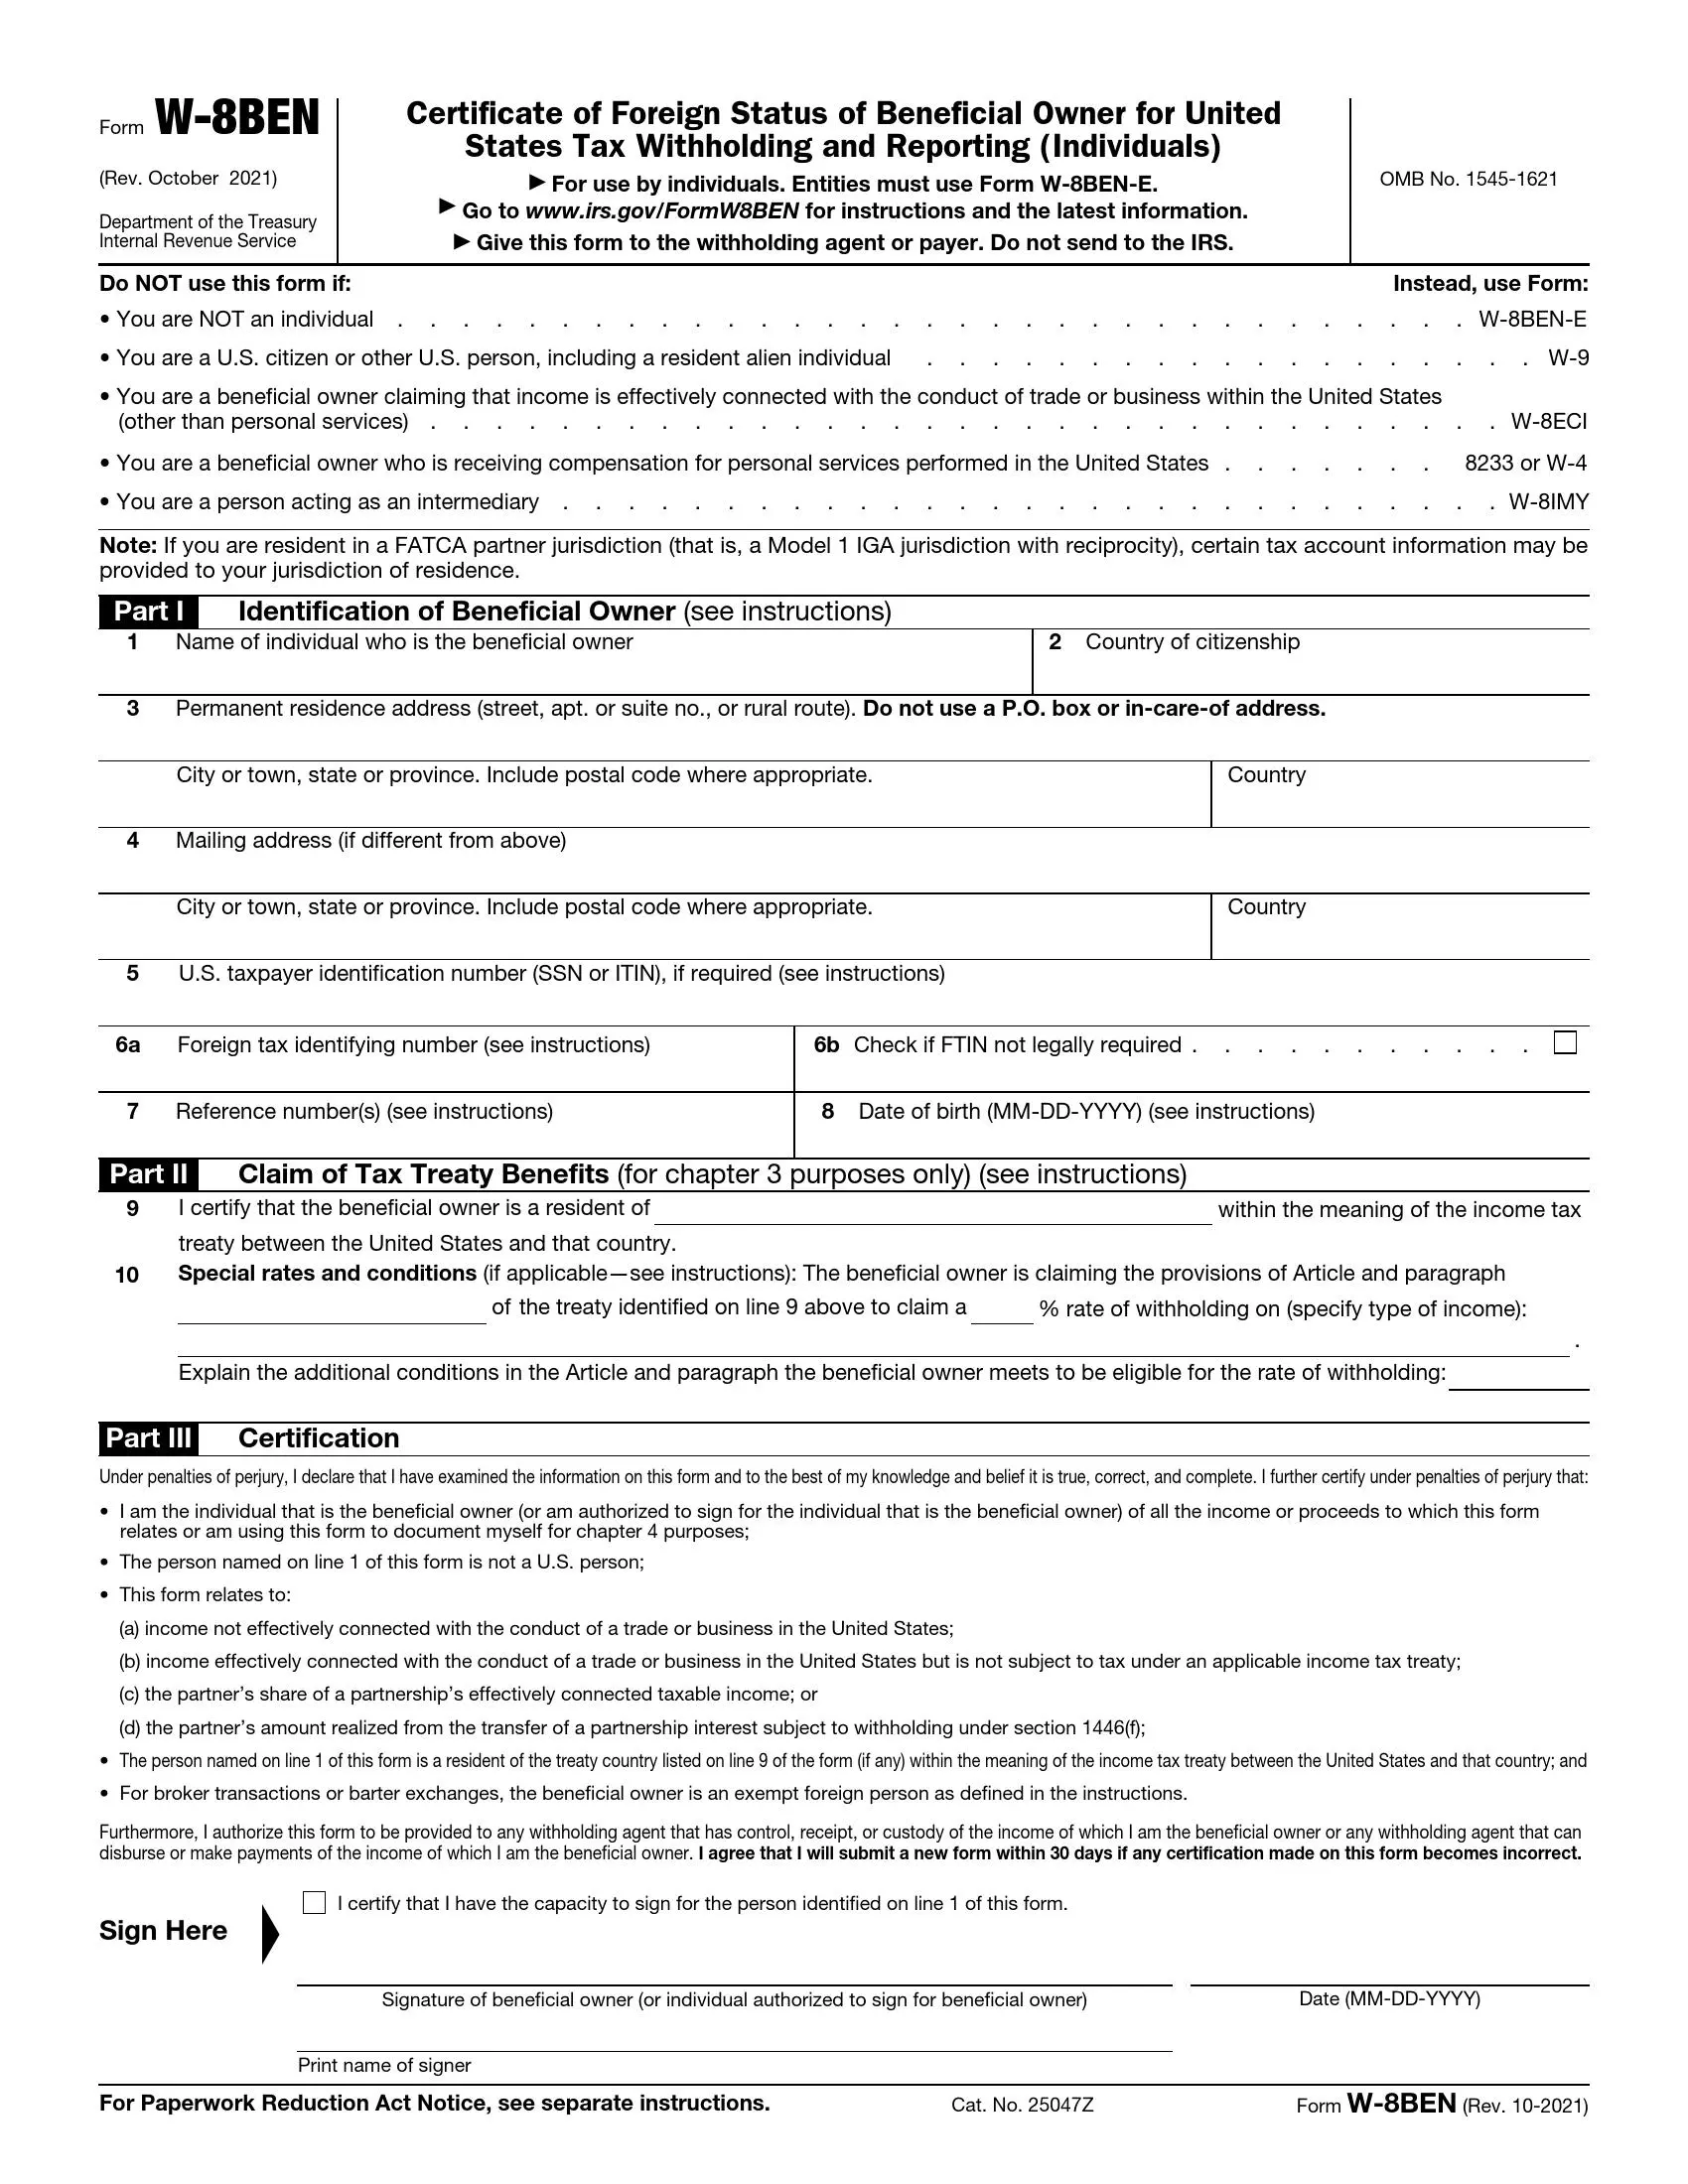 irs form w 8ben rev 10 2021 preview